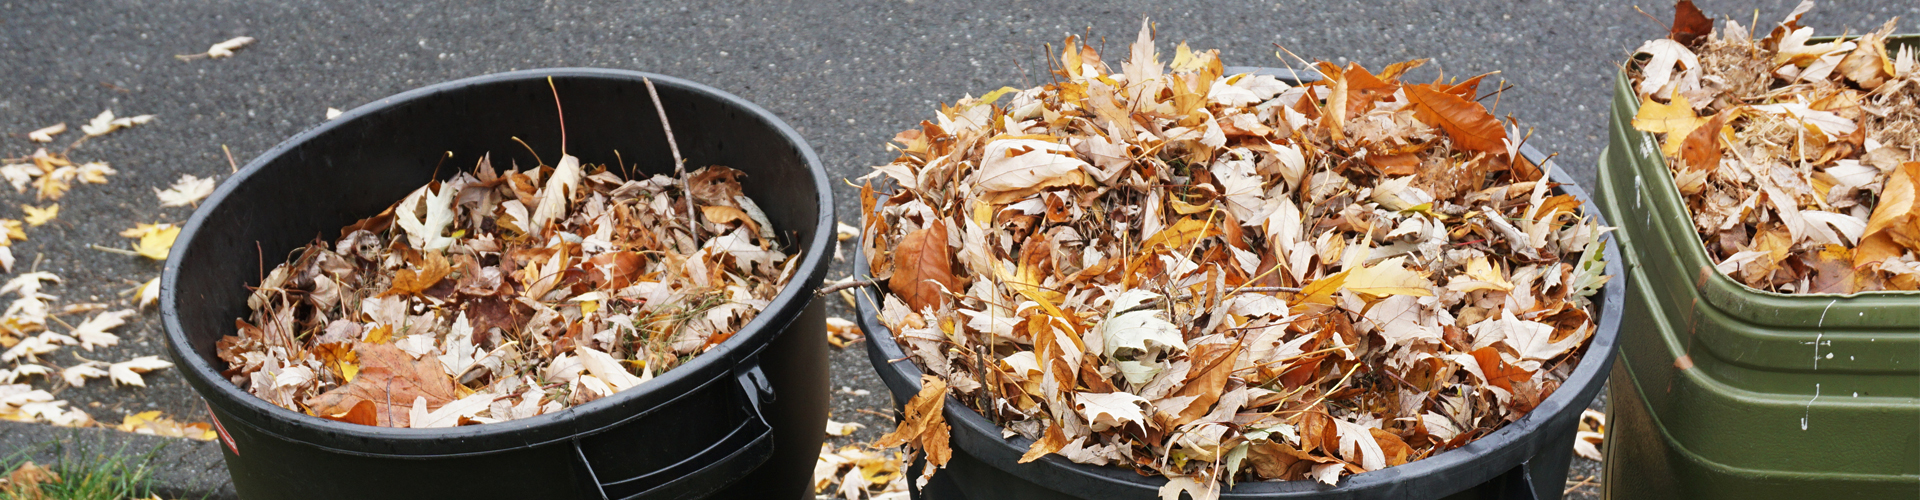 yard waste and leaves